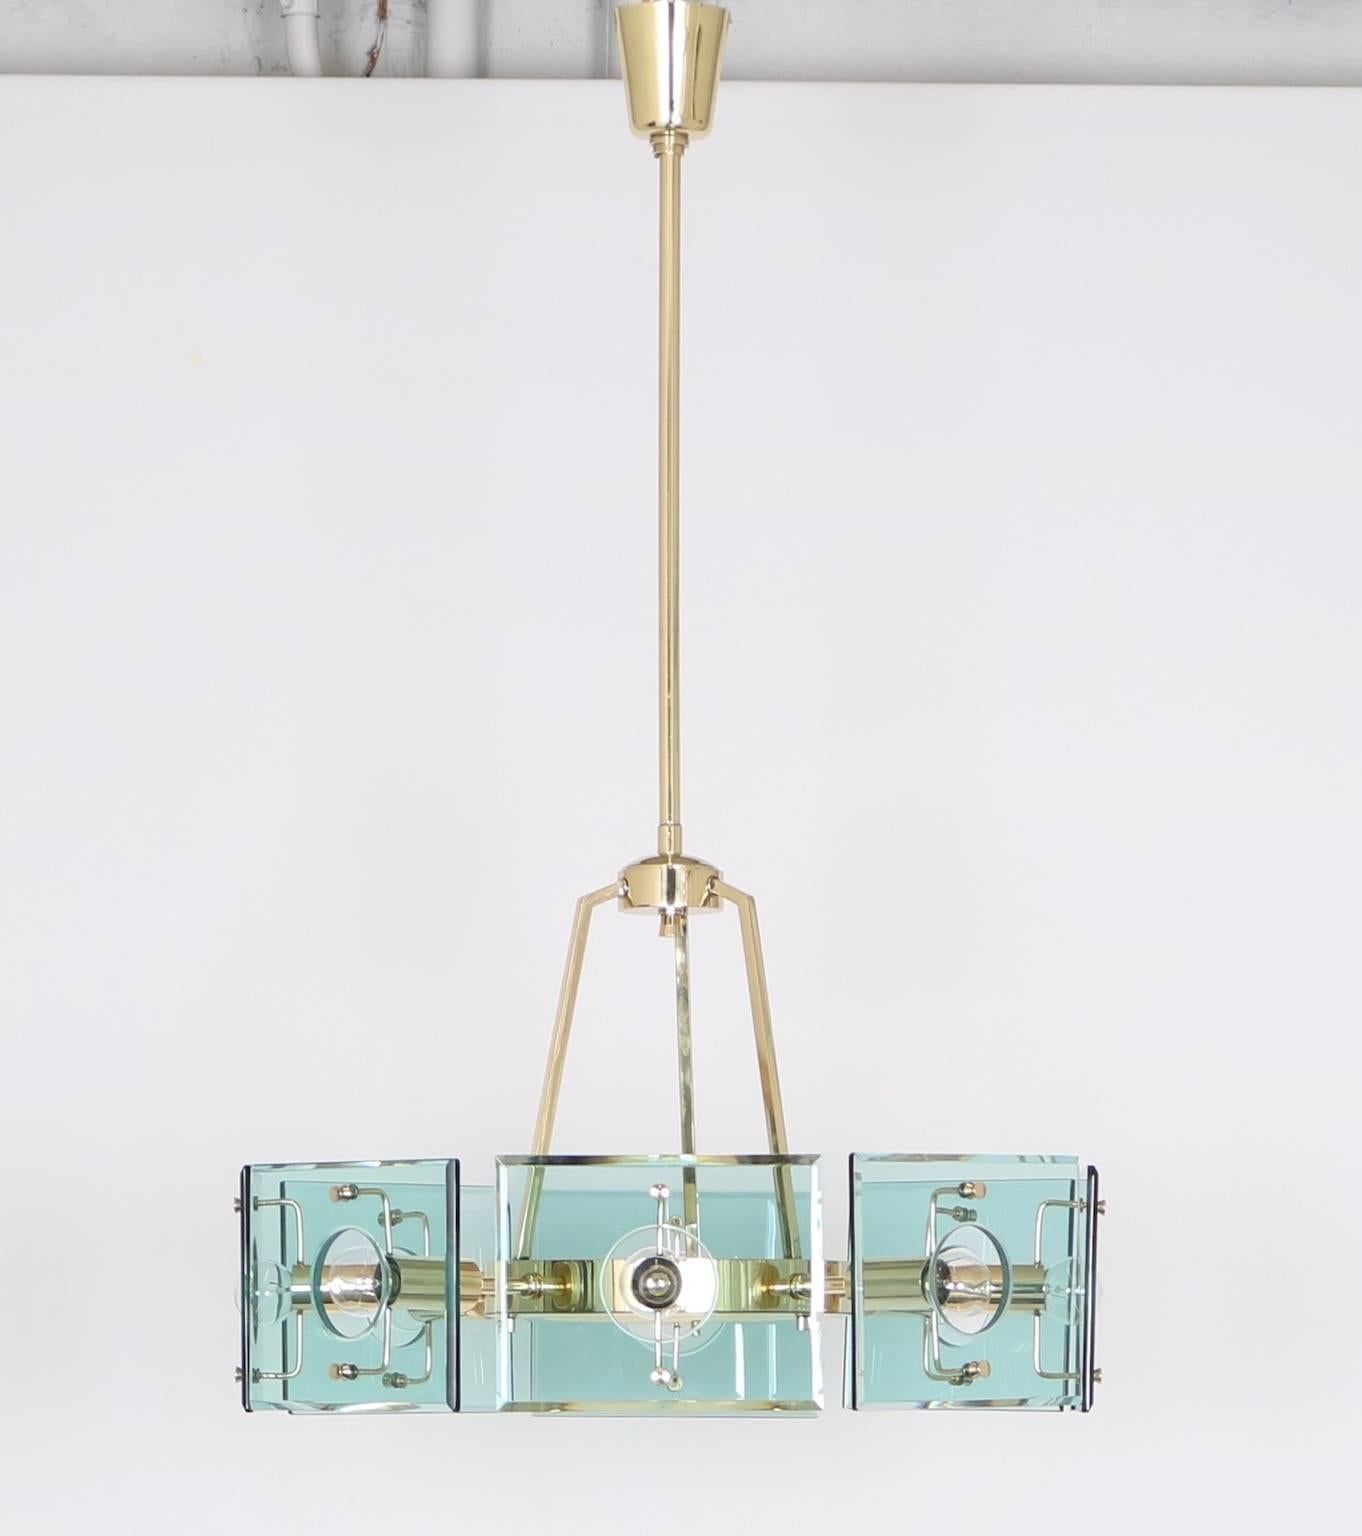 Italian chandelier designed by Gino Paroldo for Fontana Arte, circa 1950s, brass frame with cut-glass geometric panels. Completely restored and adapted to US standard, requires candelabra bulbs.

 